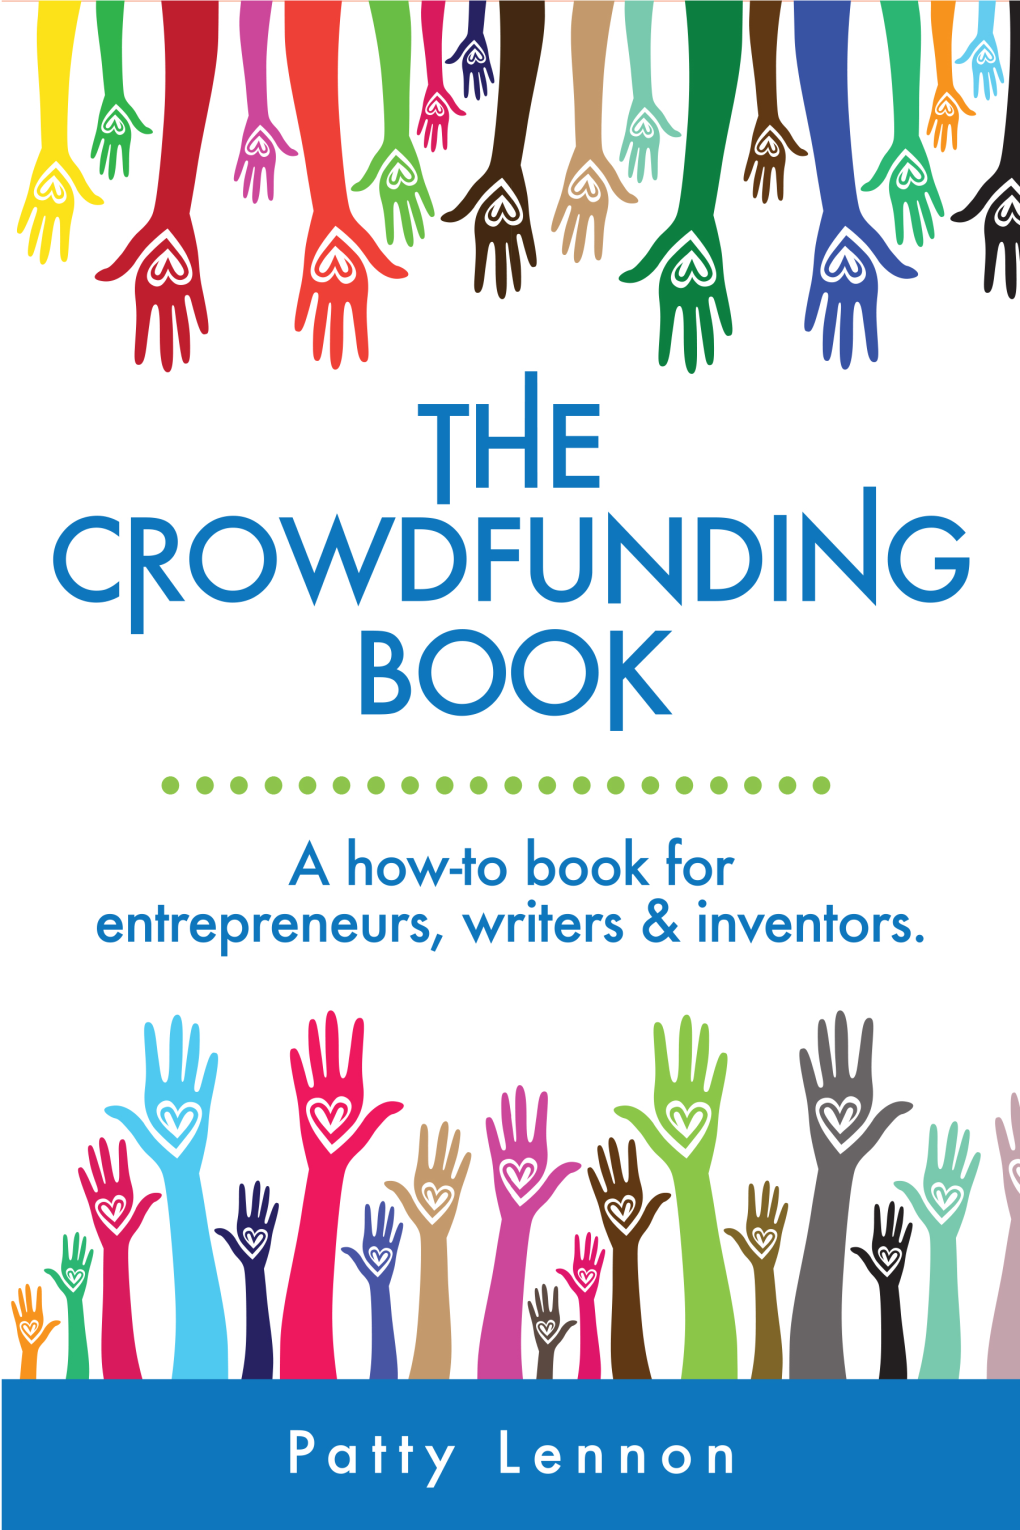 The Crowdfunding Book